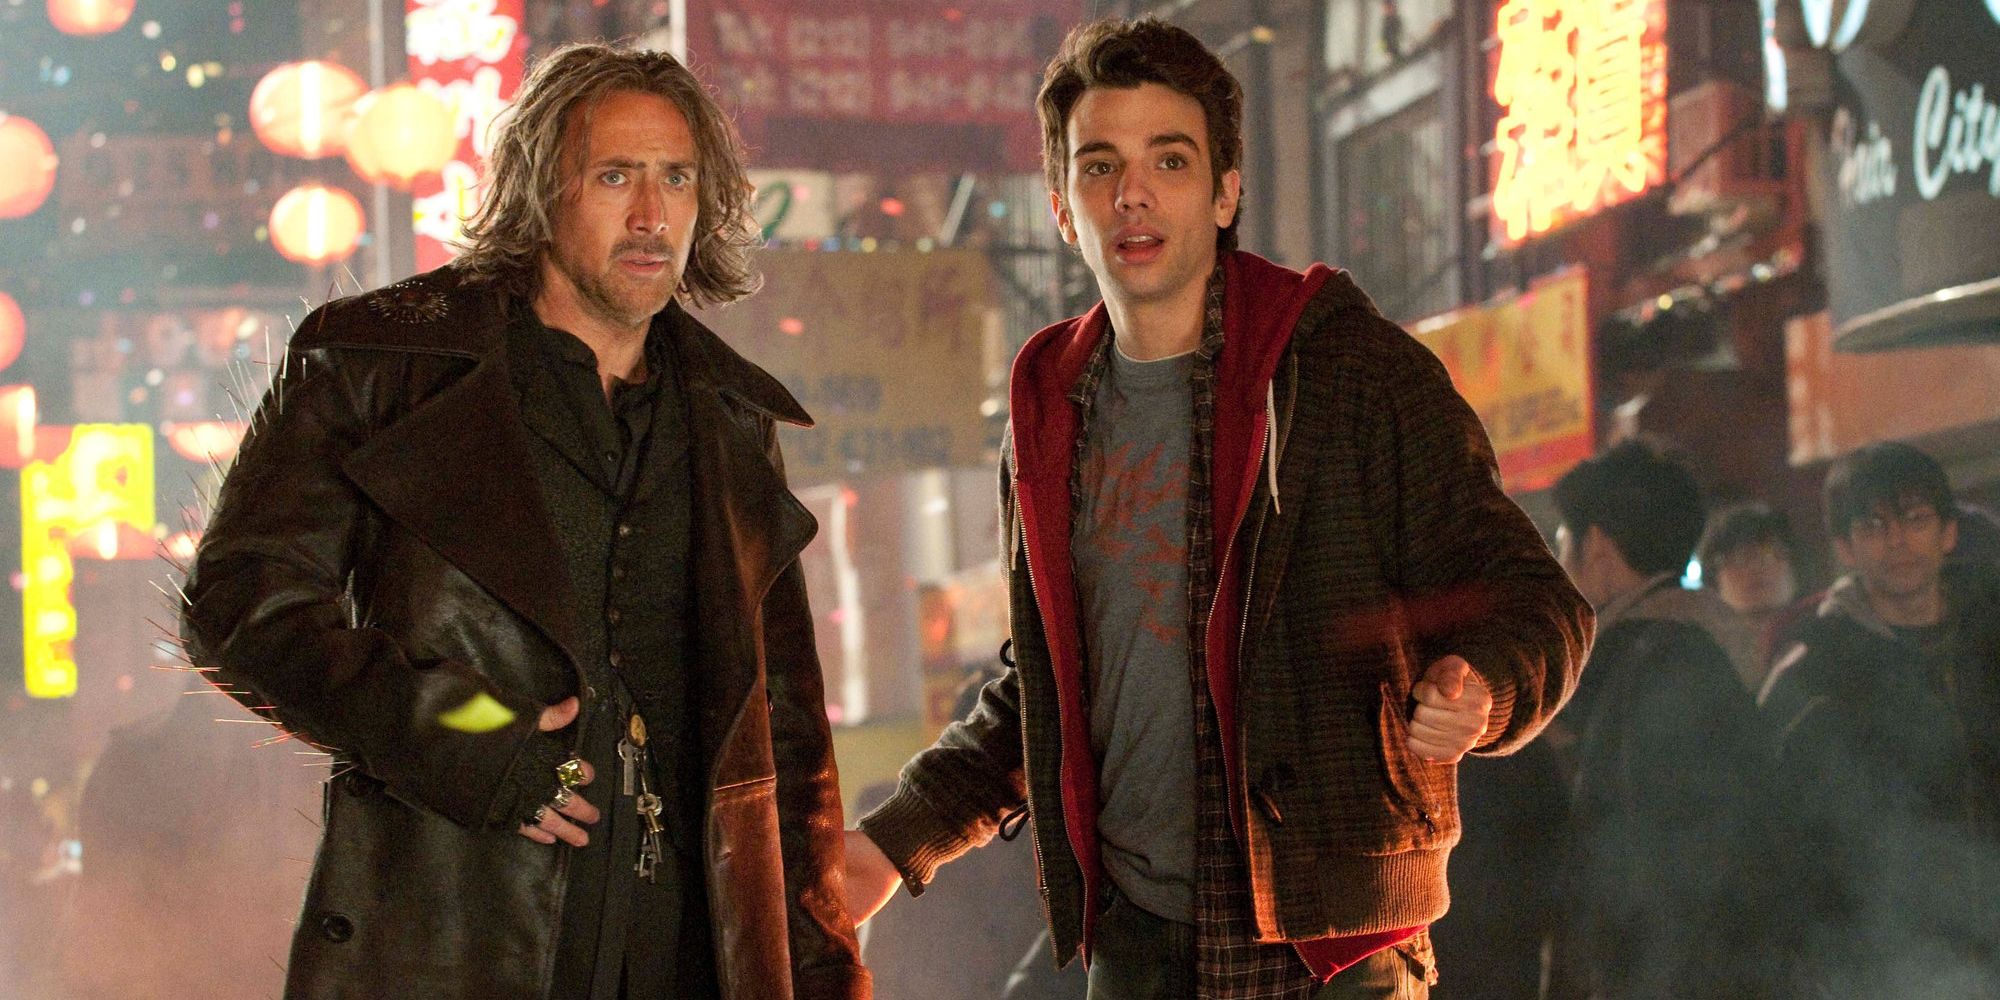 A still from the 2010 film The Sorcerer's Apprentice featuring Nicolas Cage and jay Baruchel